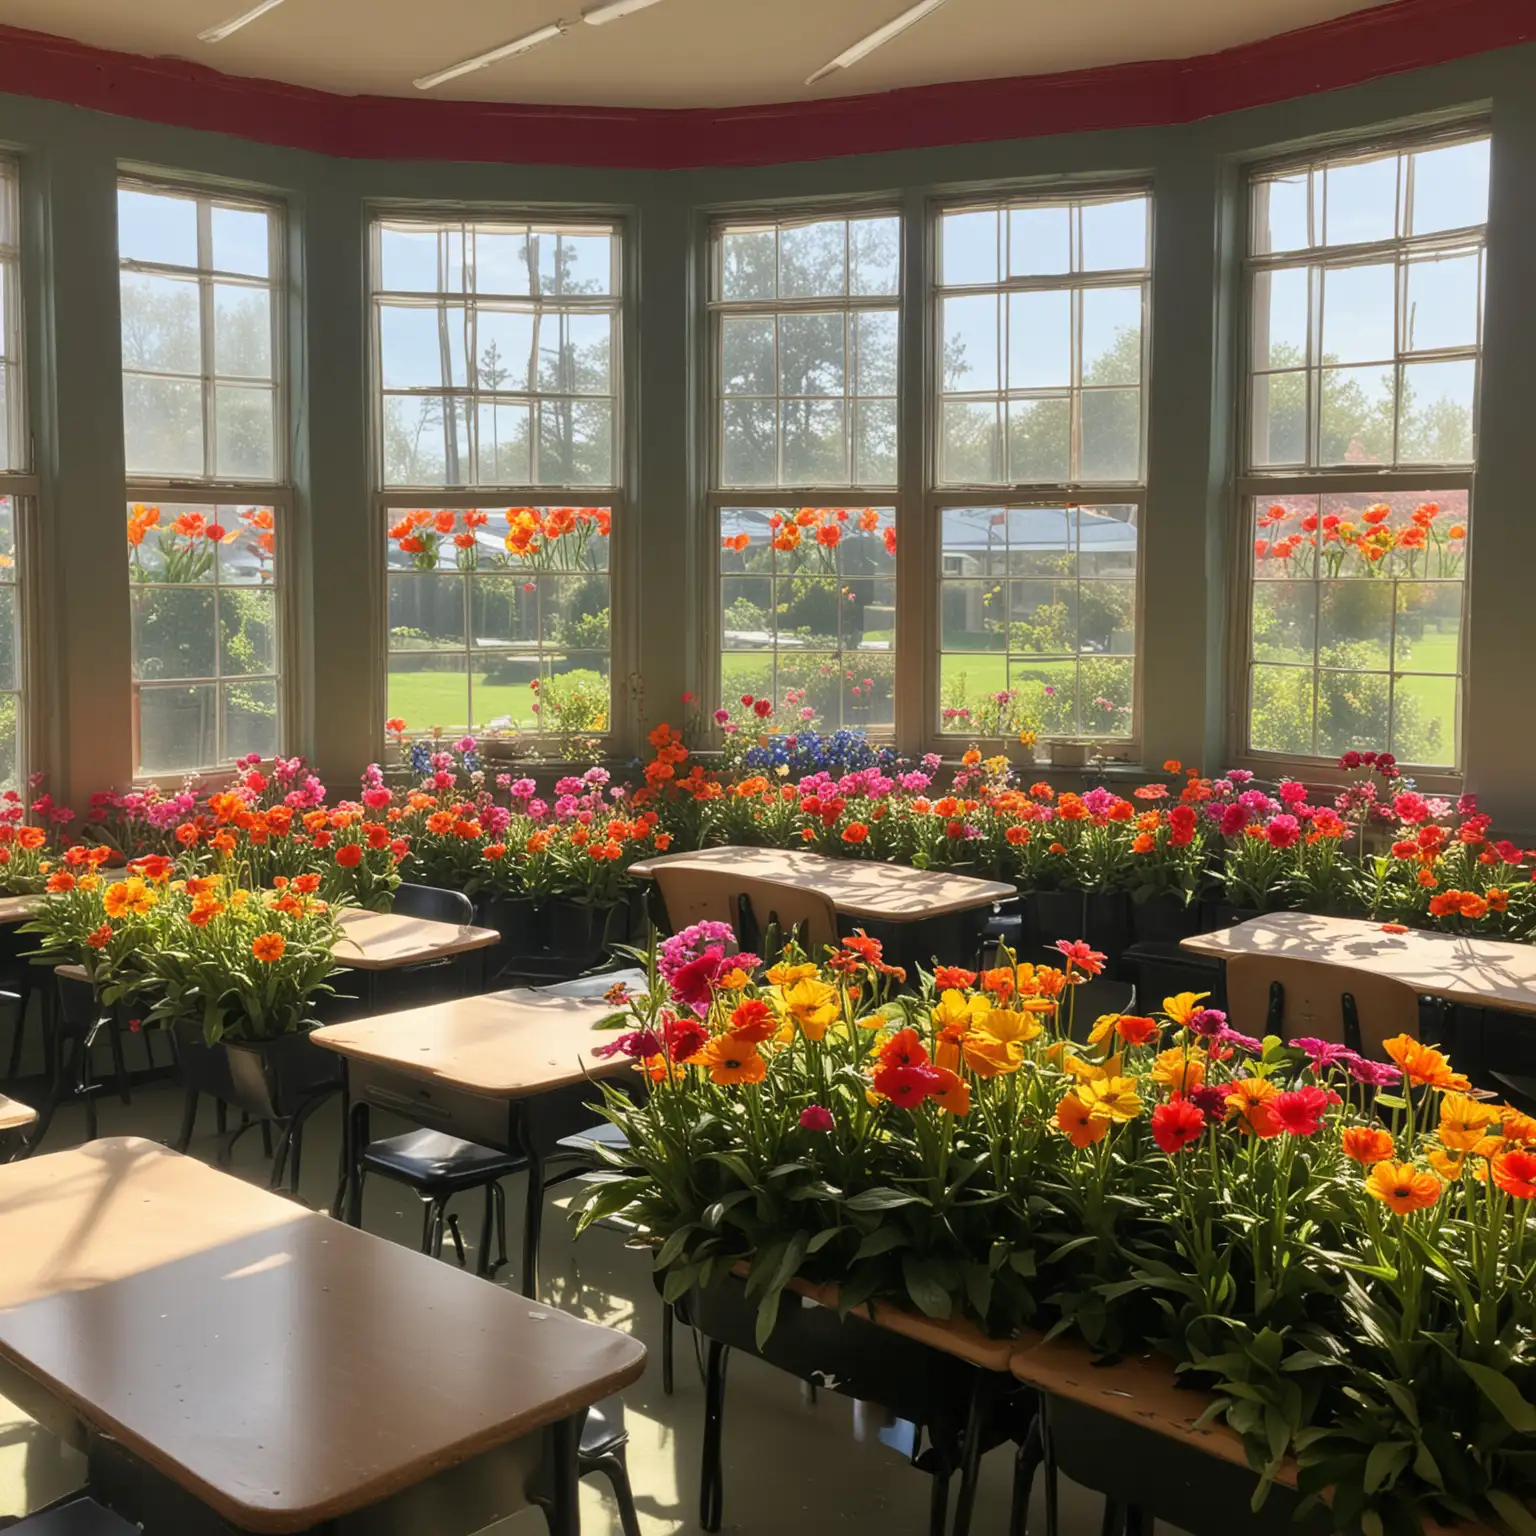 Bright and Colorful Classroom with Sunlit Flowers